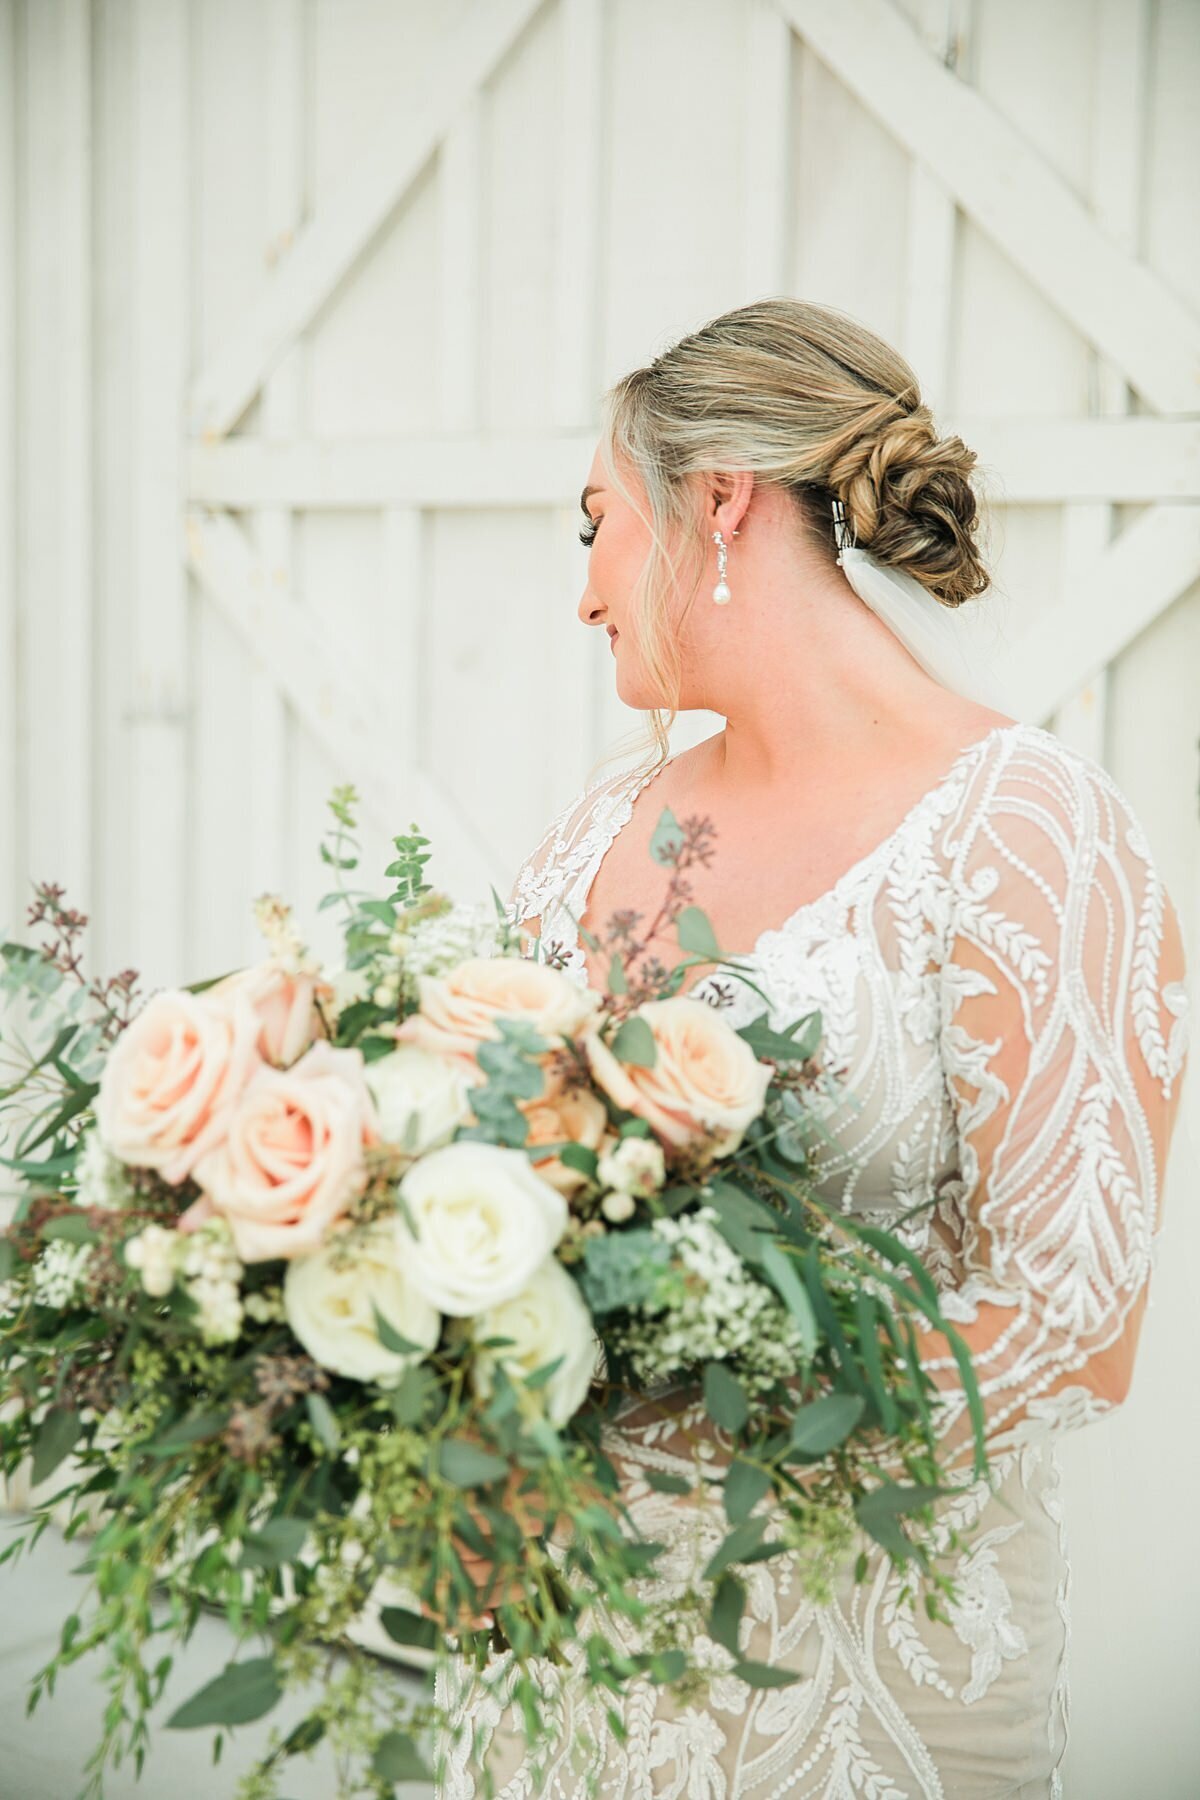 Bride holding large bouquet filled with greenery and roses